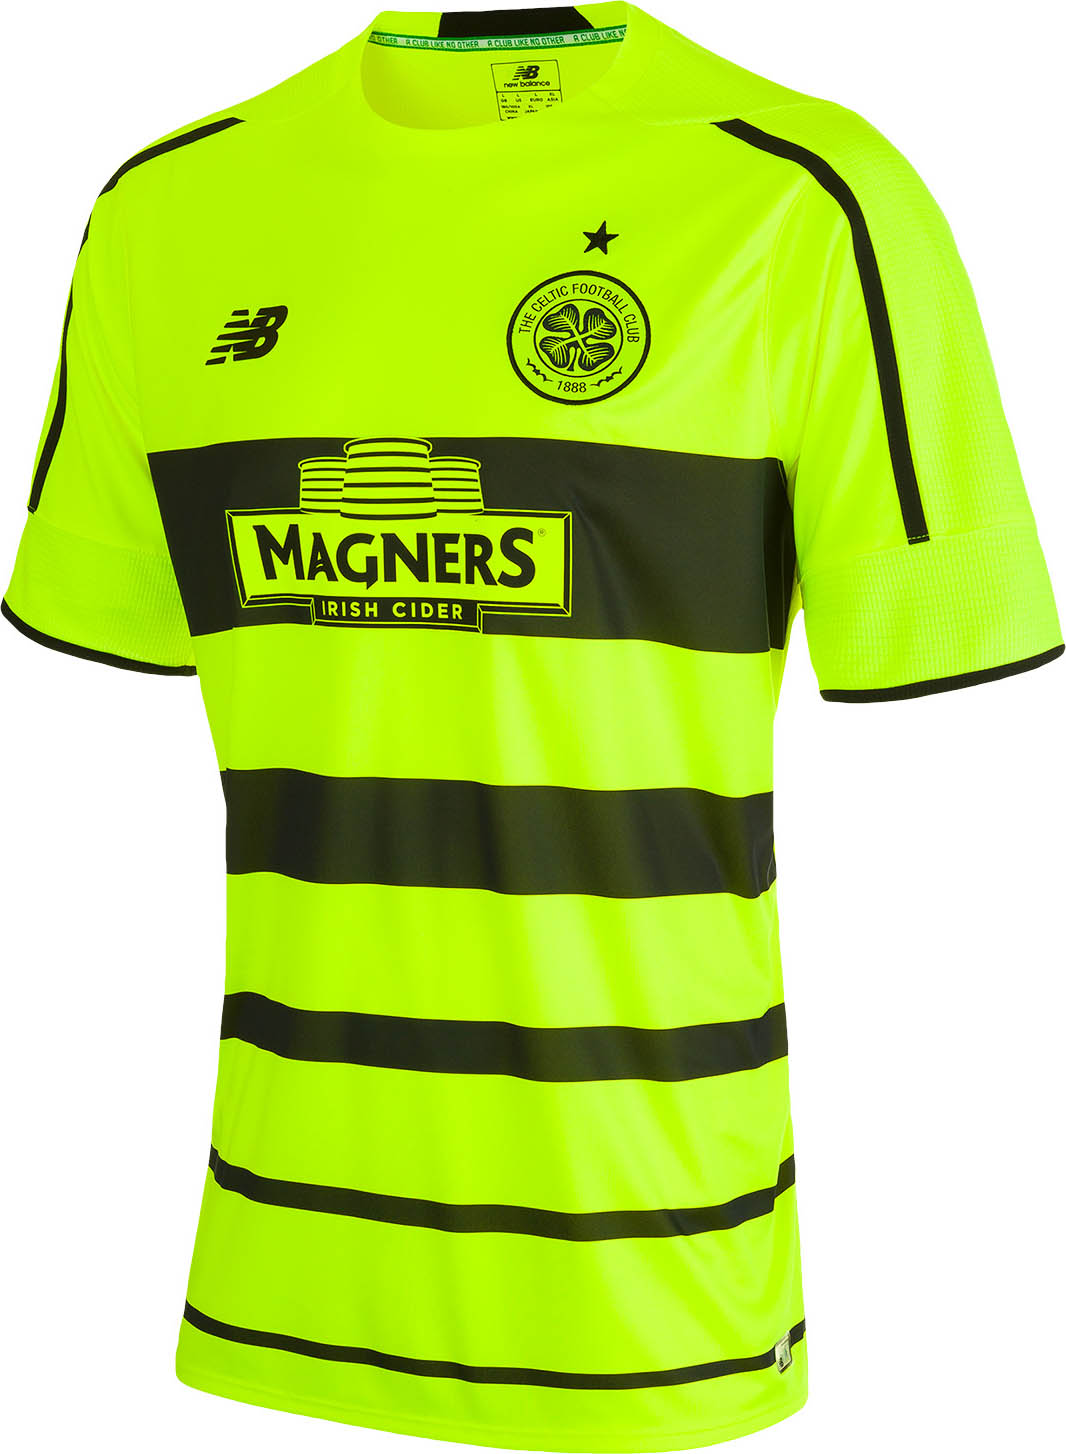 Away and Third kits 17/18  TalkCeltic - The Ultimate Celtic FC Forum